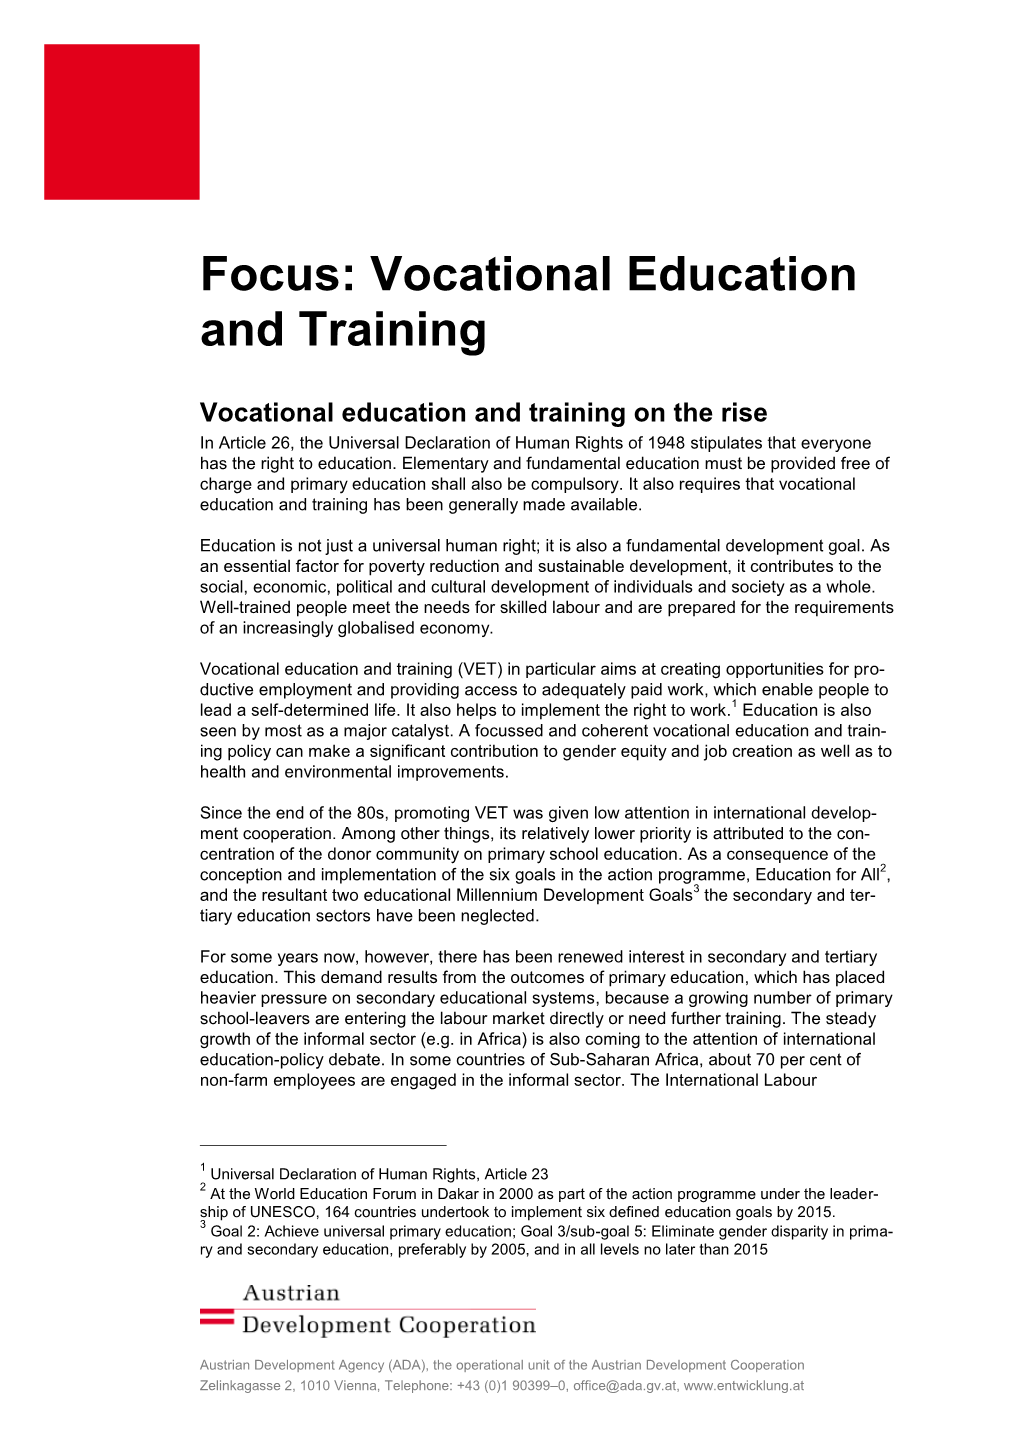 Focus: Vocational Education and Training